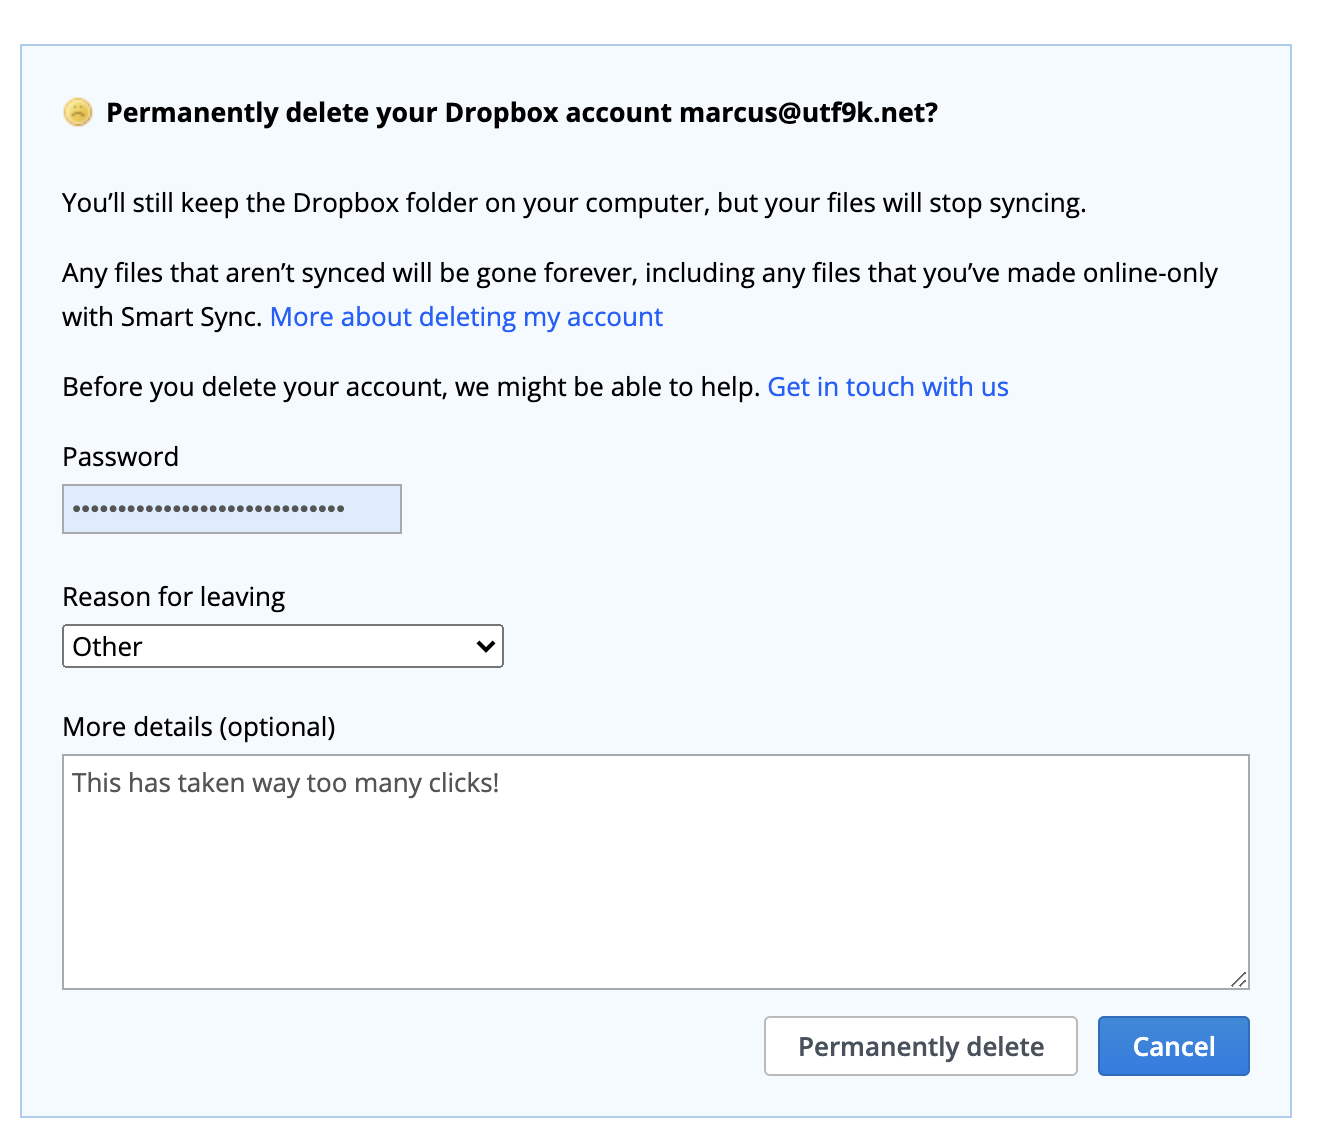 A form that says "Permanently delete your Dropbox account" with three inputs: one for your password, one for your reason for leaving and a third to enter in more details.